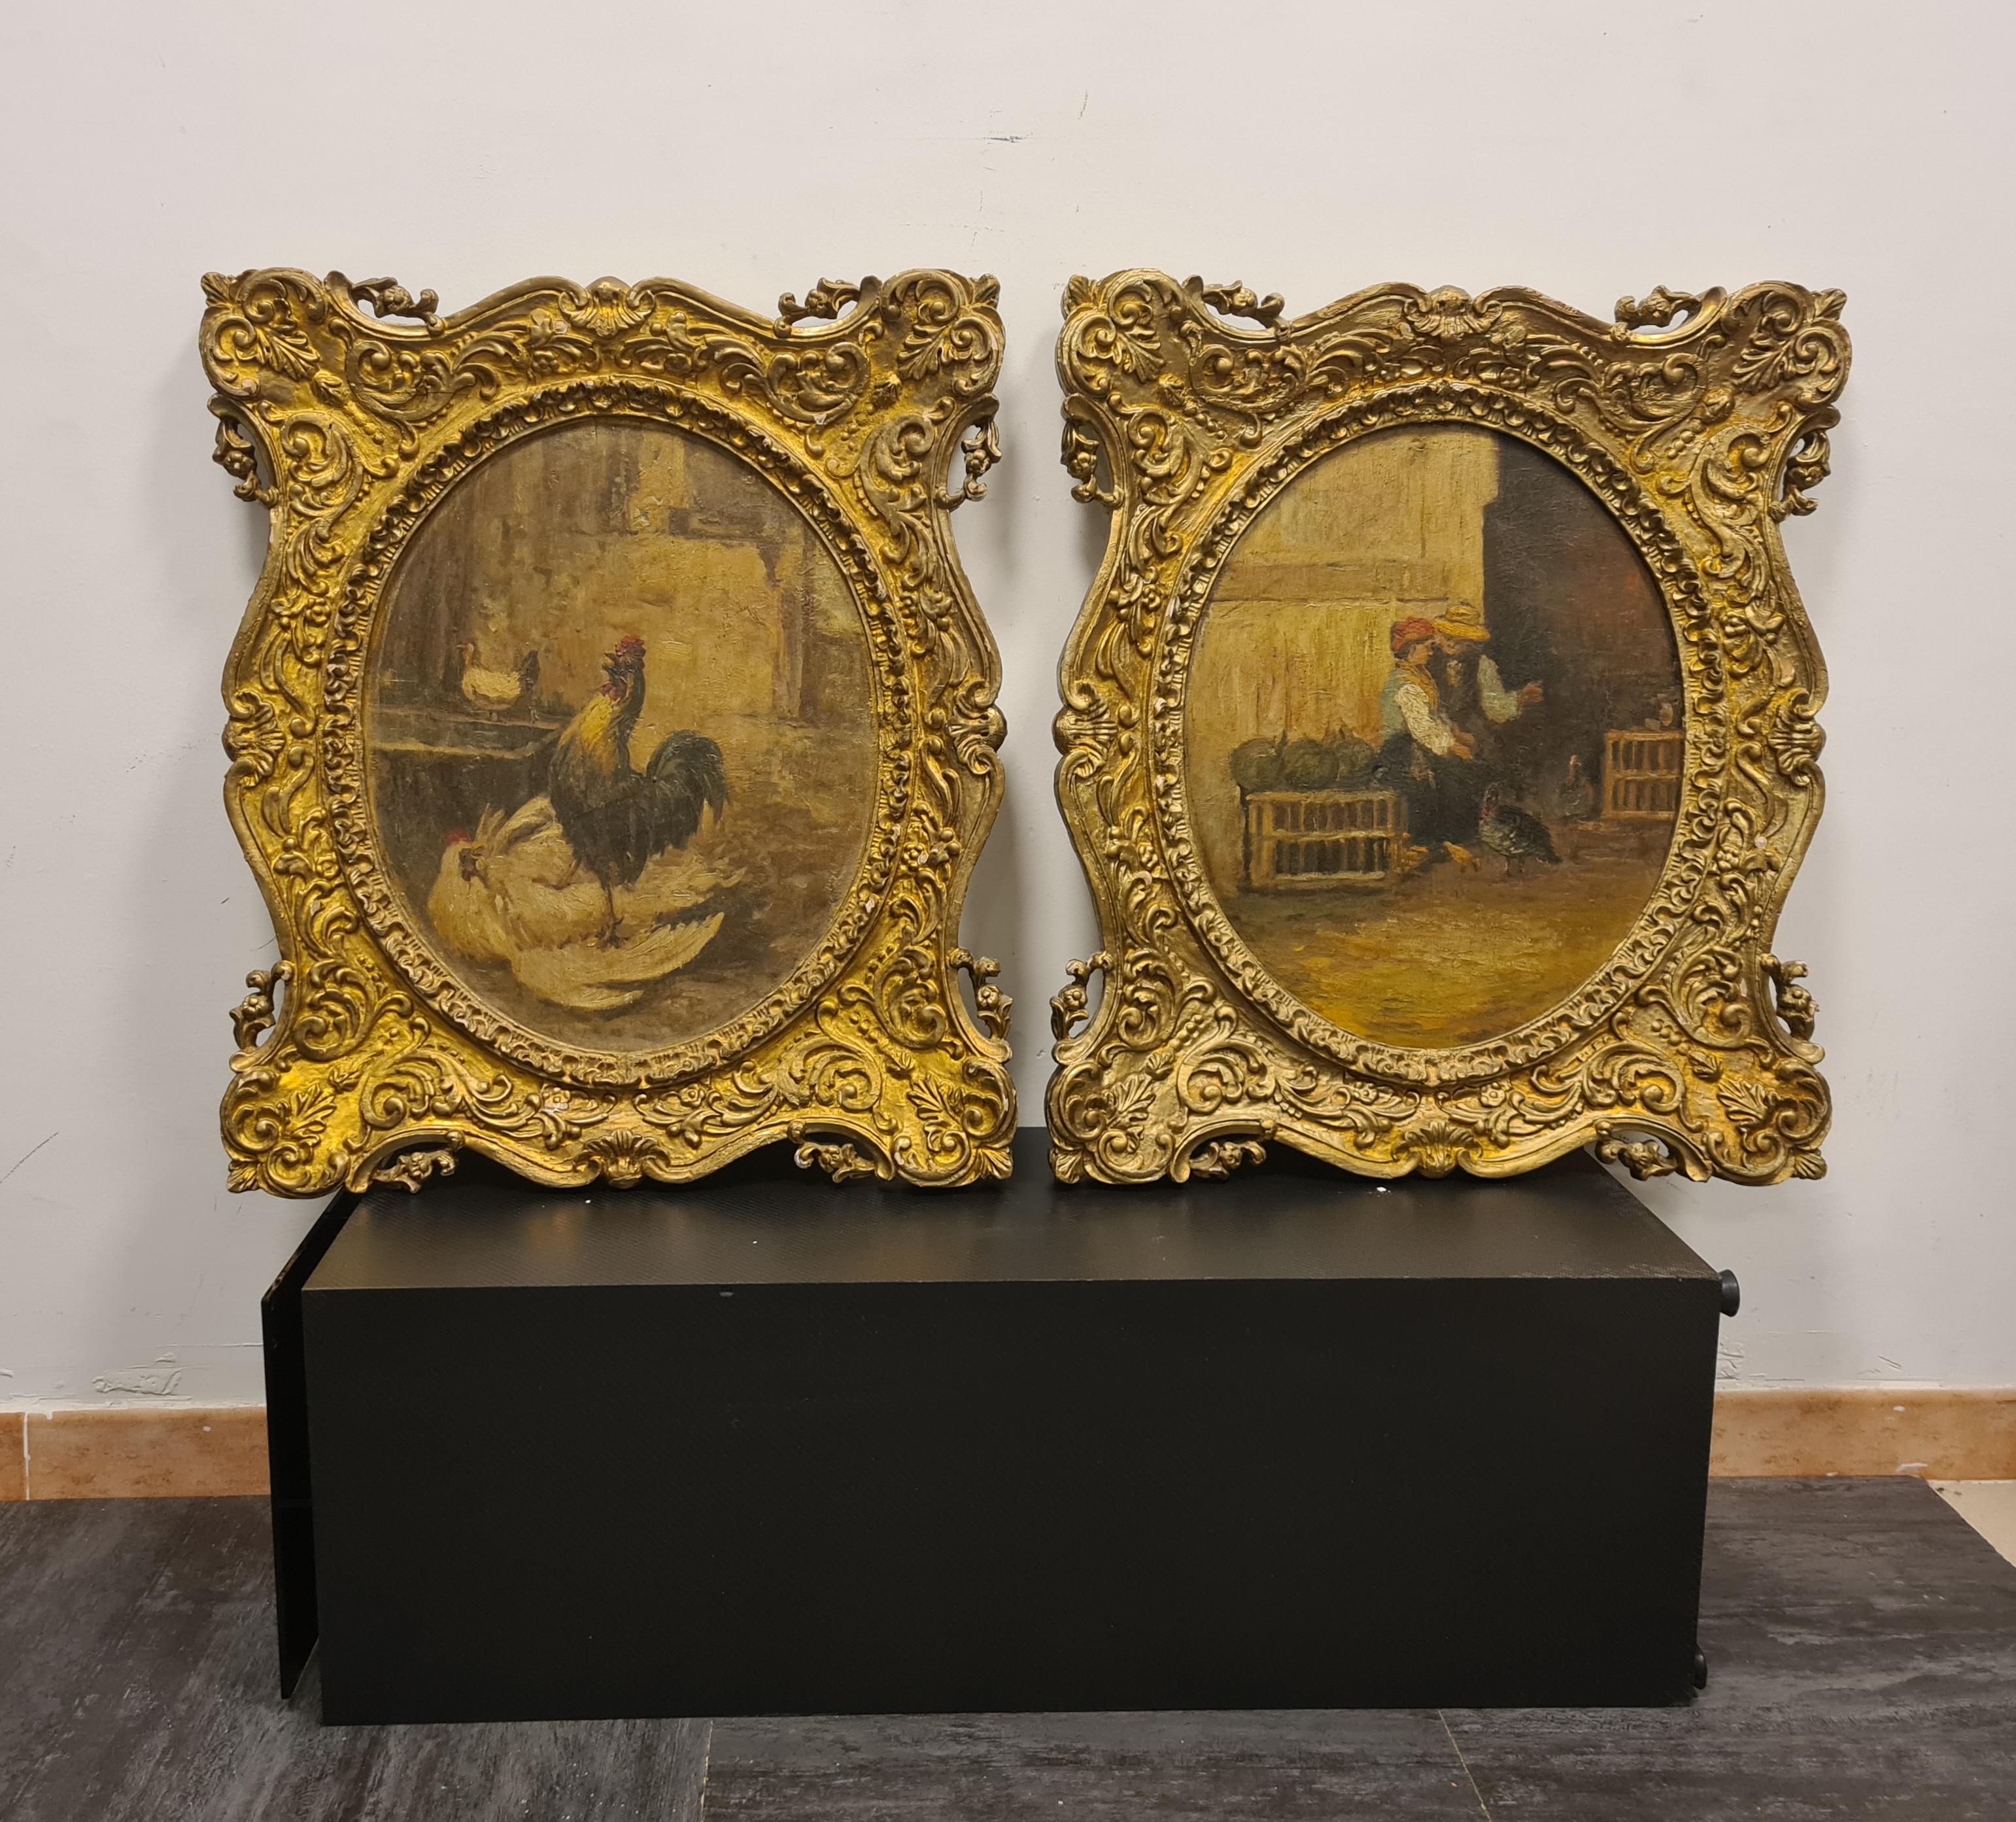 Pair of paintings depicting scenes of peasant life.

Made in oil on panel these two oval-shaped paintings depict typical rural scenes with roosters and peasants.

Dated late 1800' with majestic eighteenth-century style frames but coeval with the